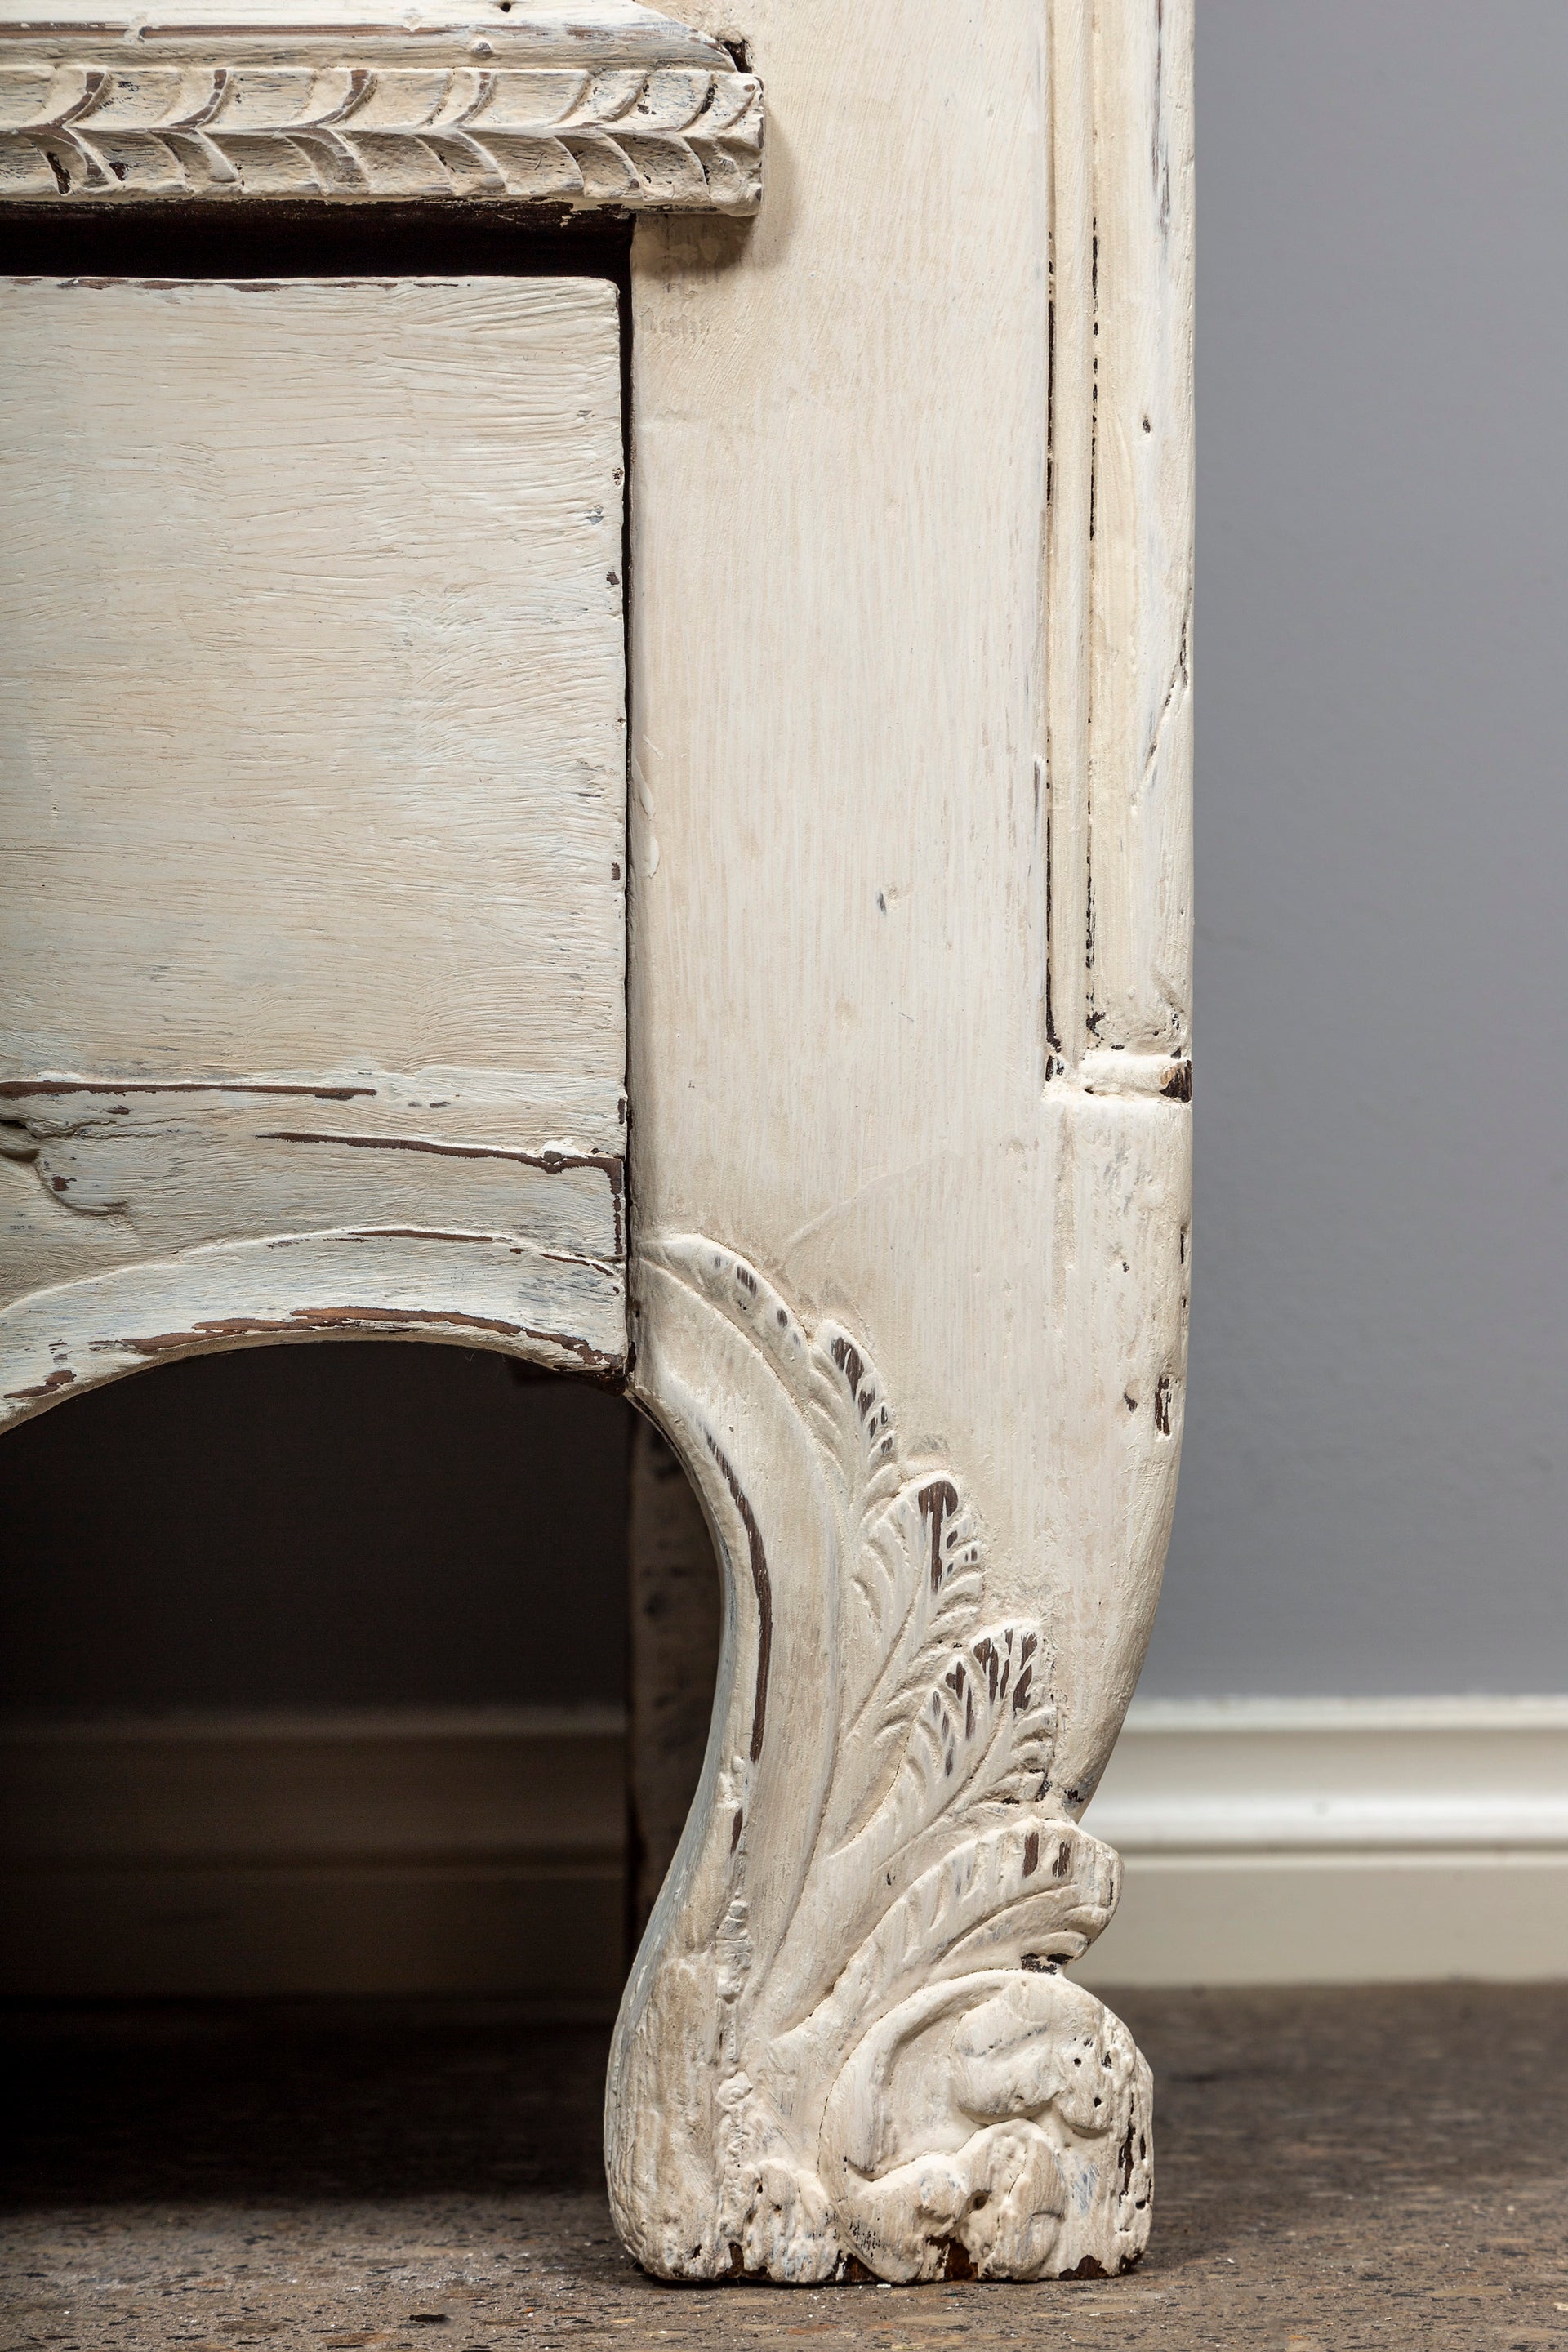 SOLD A beautifully carved white painted oak armoire of attractive proportions, French early 19th Century